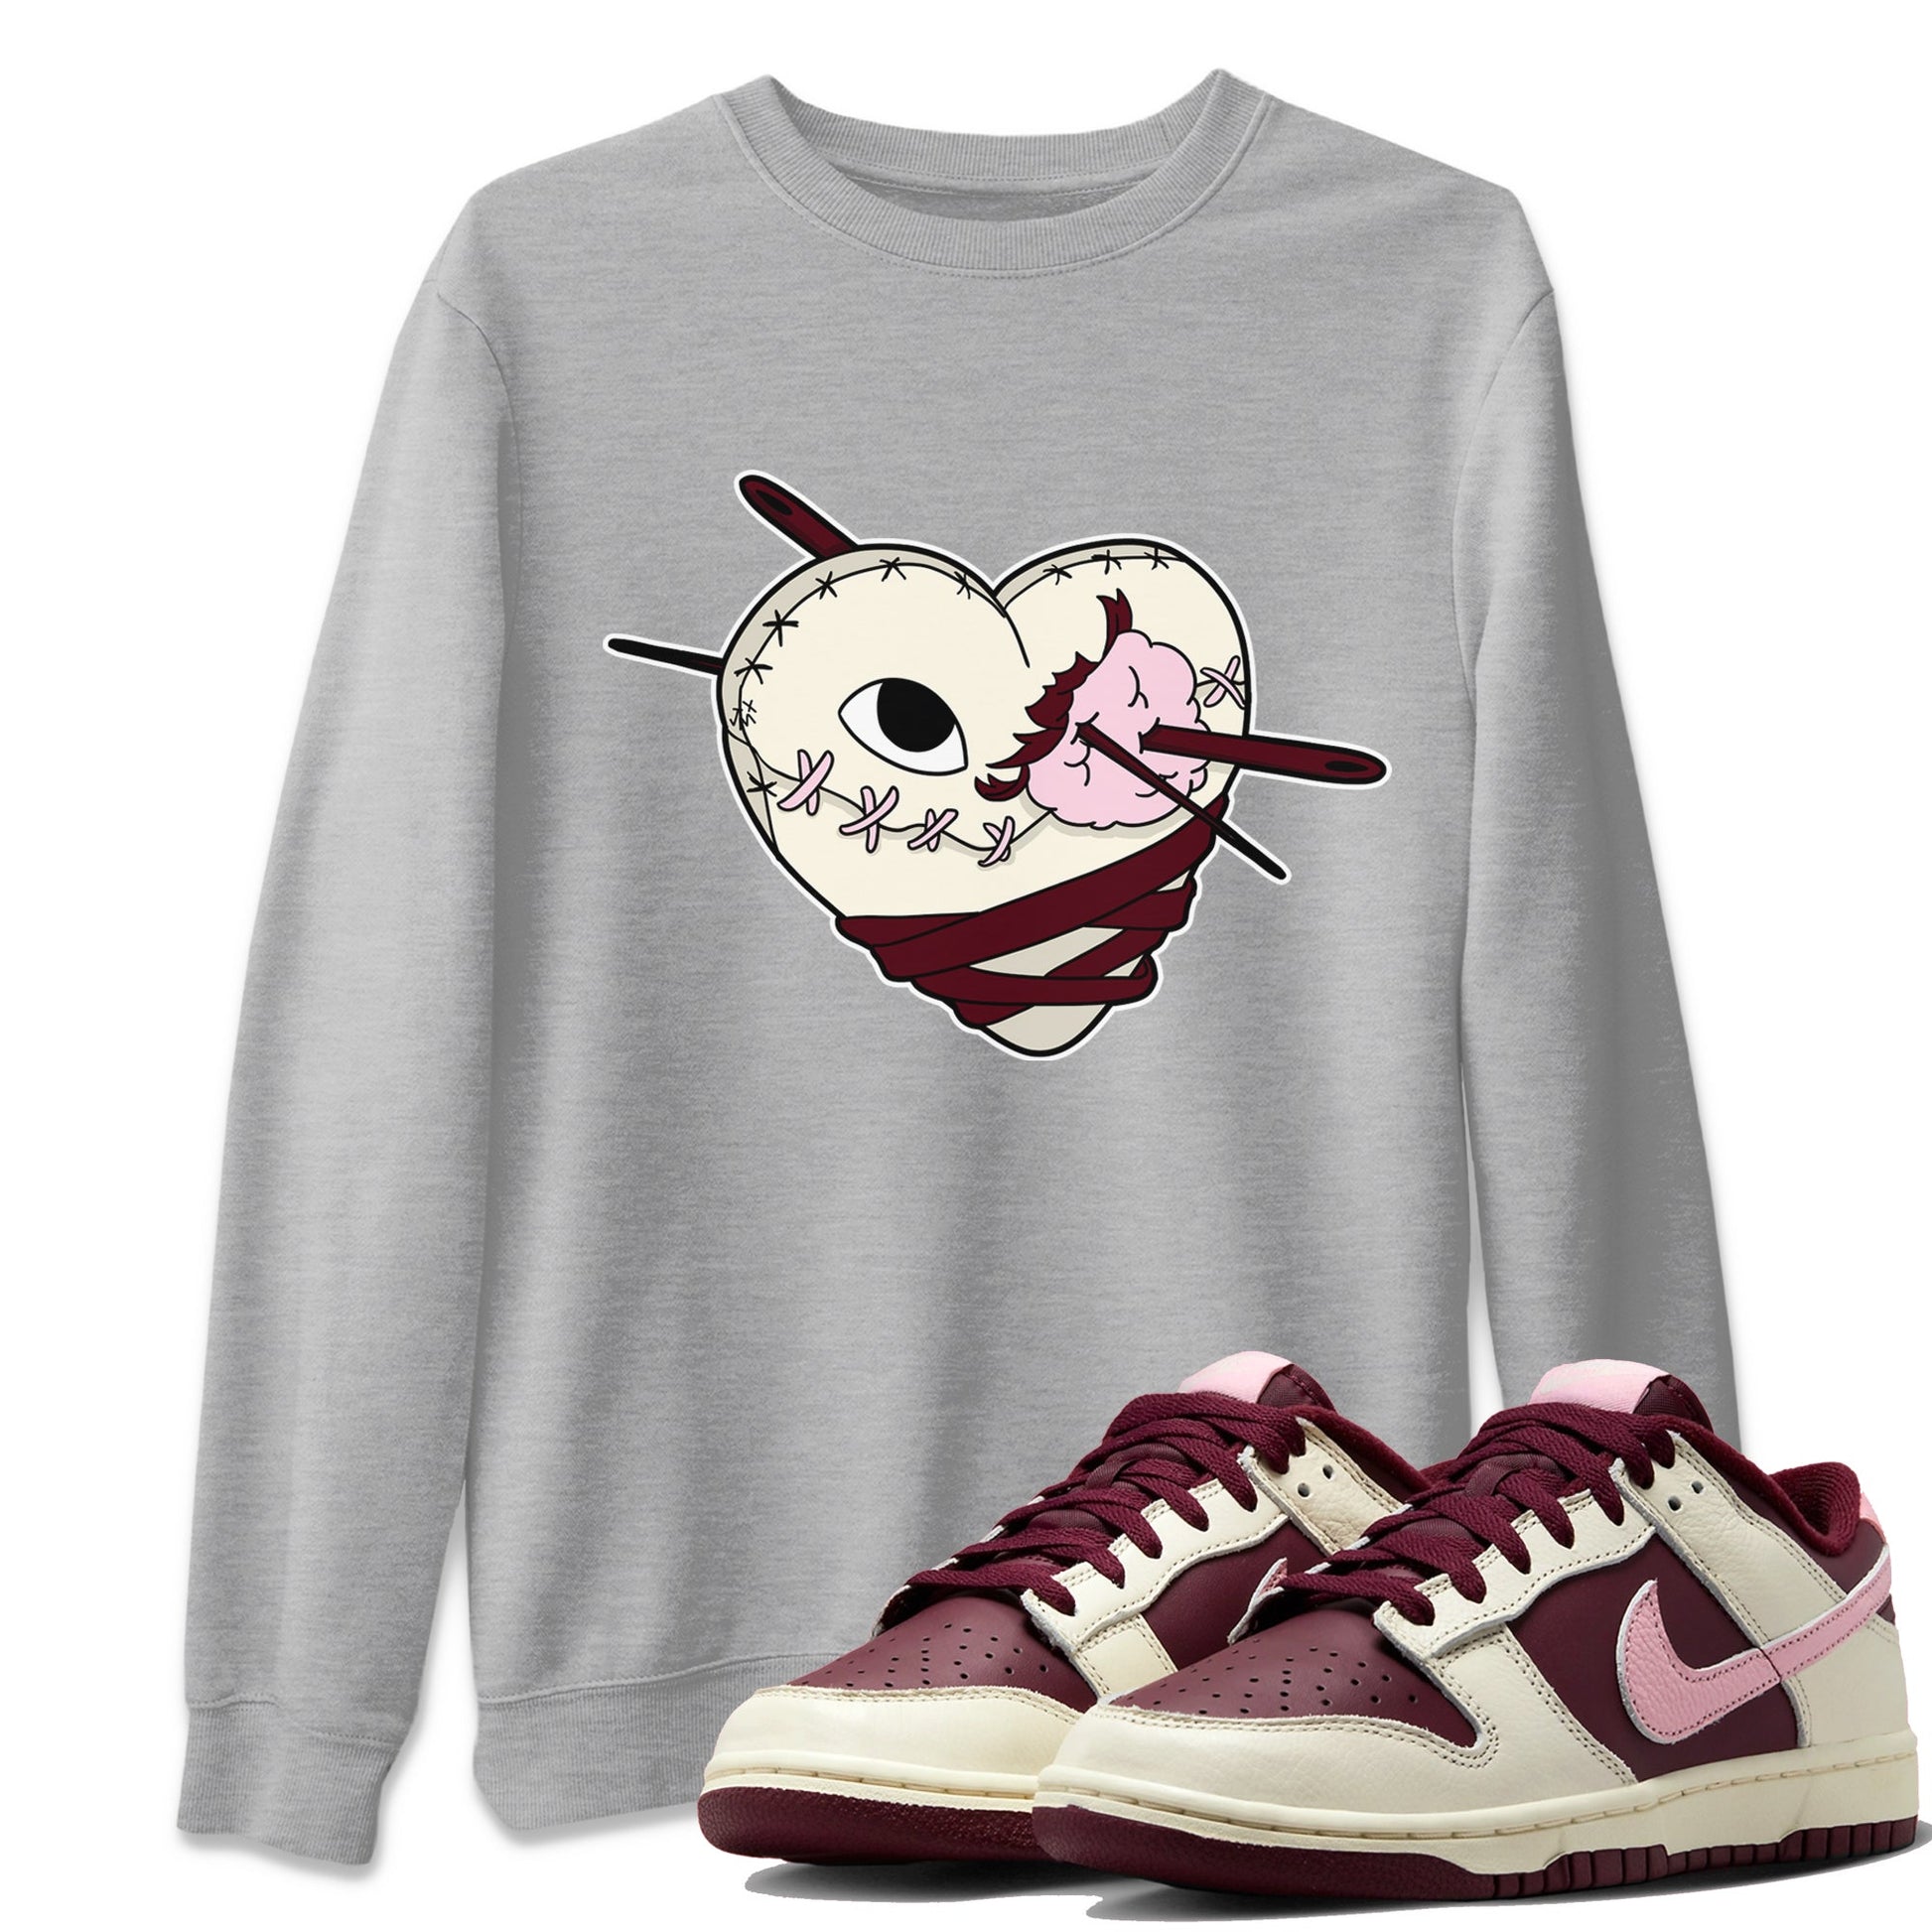 Dunk Valentines Day Sneaker Match Tees Hurt Heart Sneaker Tees Nike Dunk Valentine's Day Sneaker SNRT Sneaker Tees Unisex Shirts